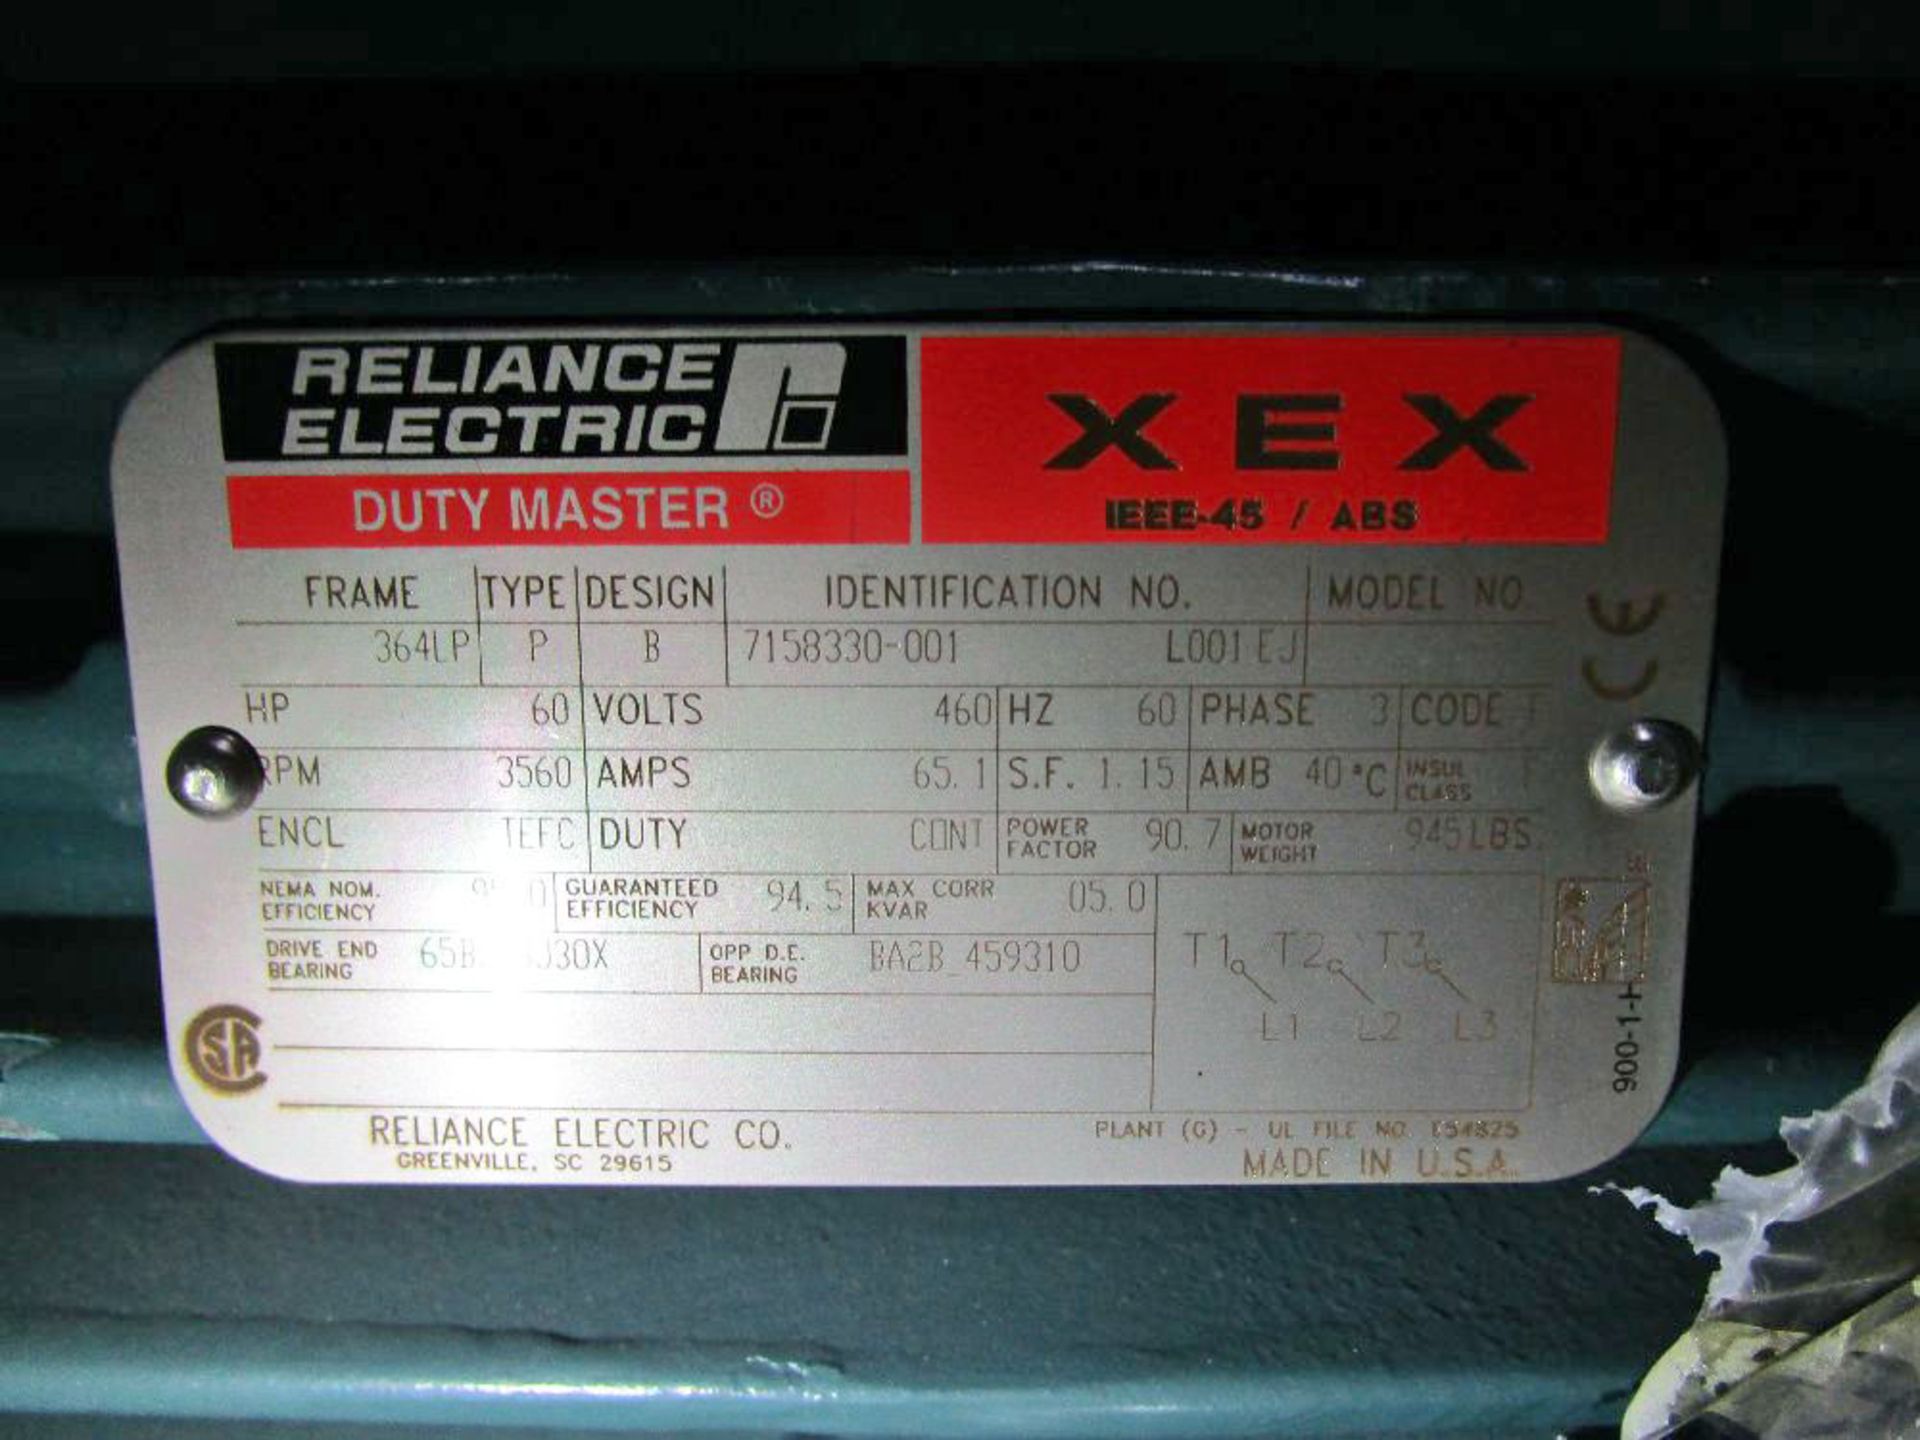 Reliance Electric Model L001EJ 60 HP Electric Induction Motor - Image 3 of 3